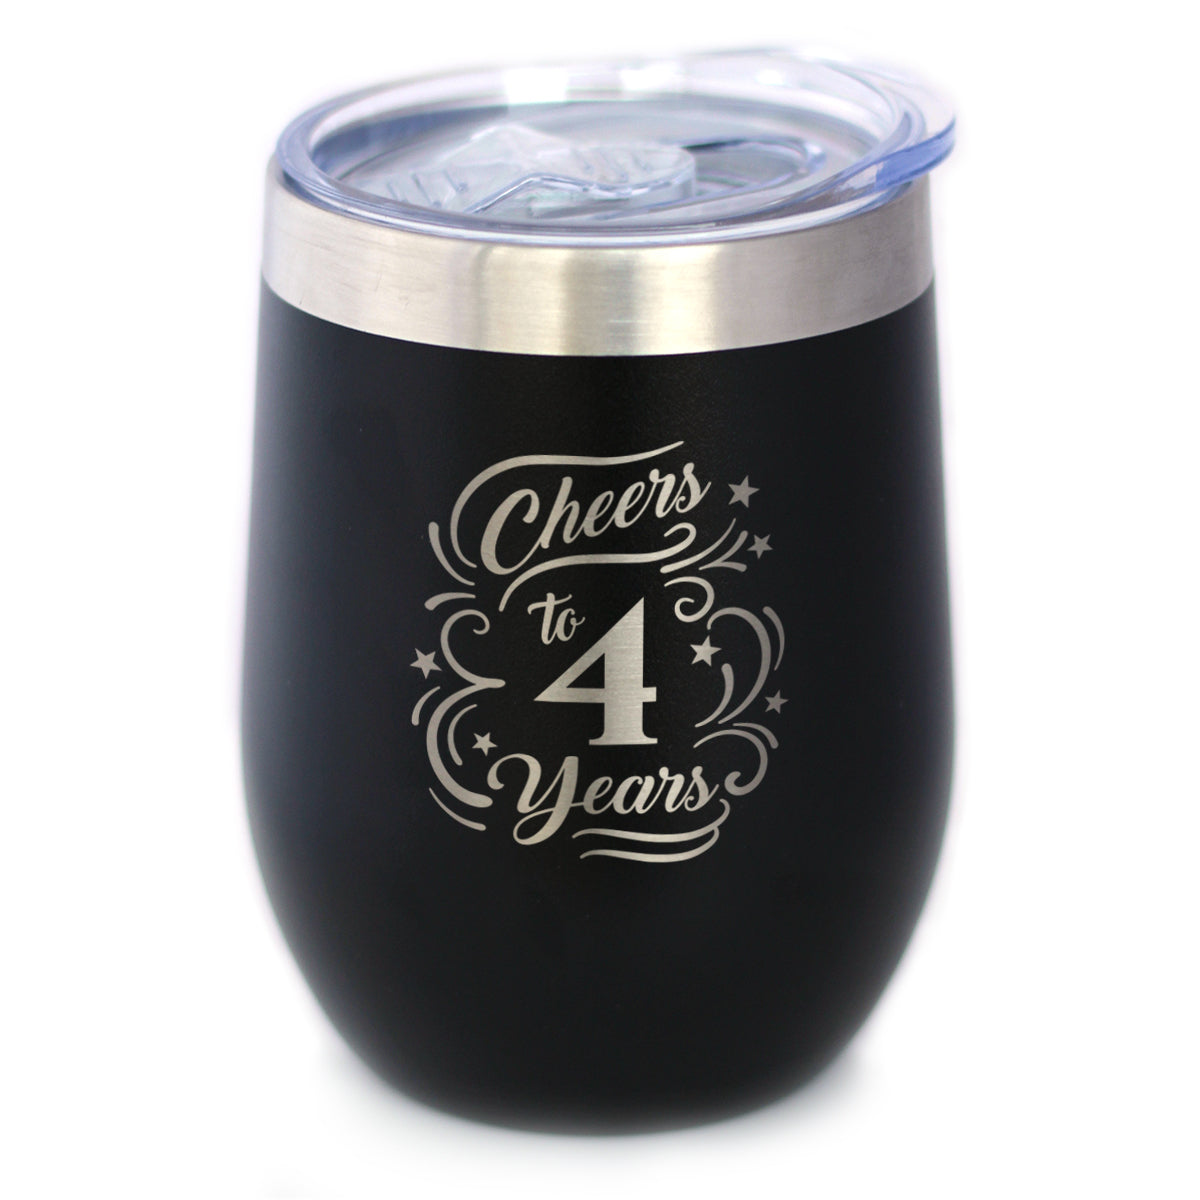 Cheers to 4 Years - Wine Tumbler Glass with Sliding Lid - Stainless Steel Insulated Mug - 4th Anniversary Gifts and Party Decor